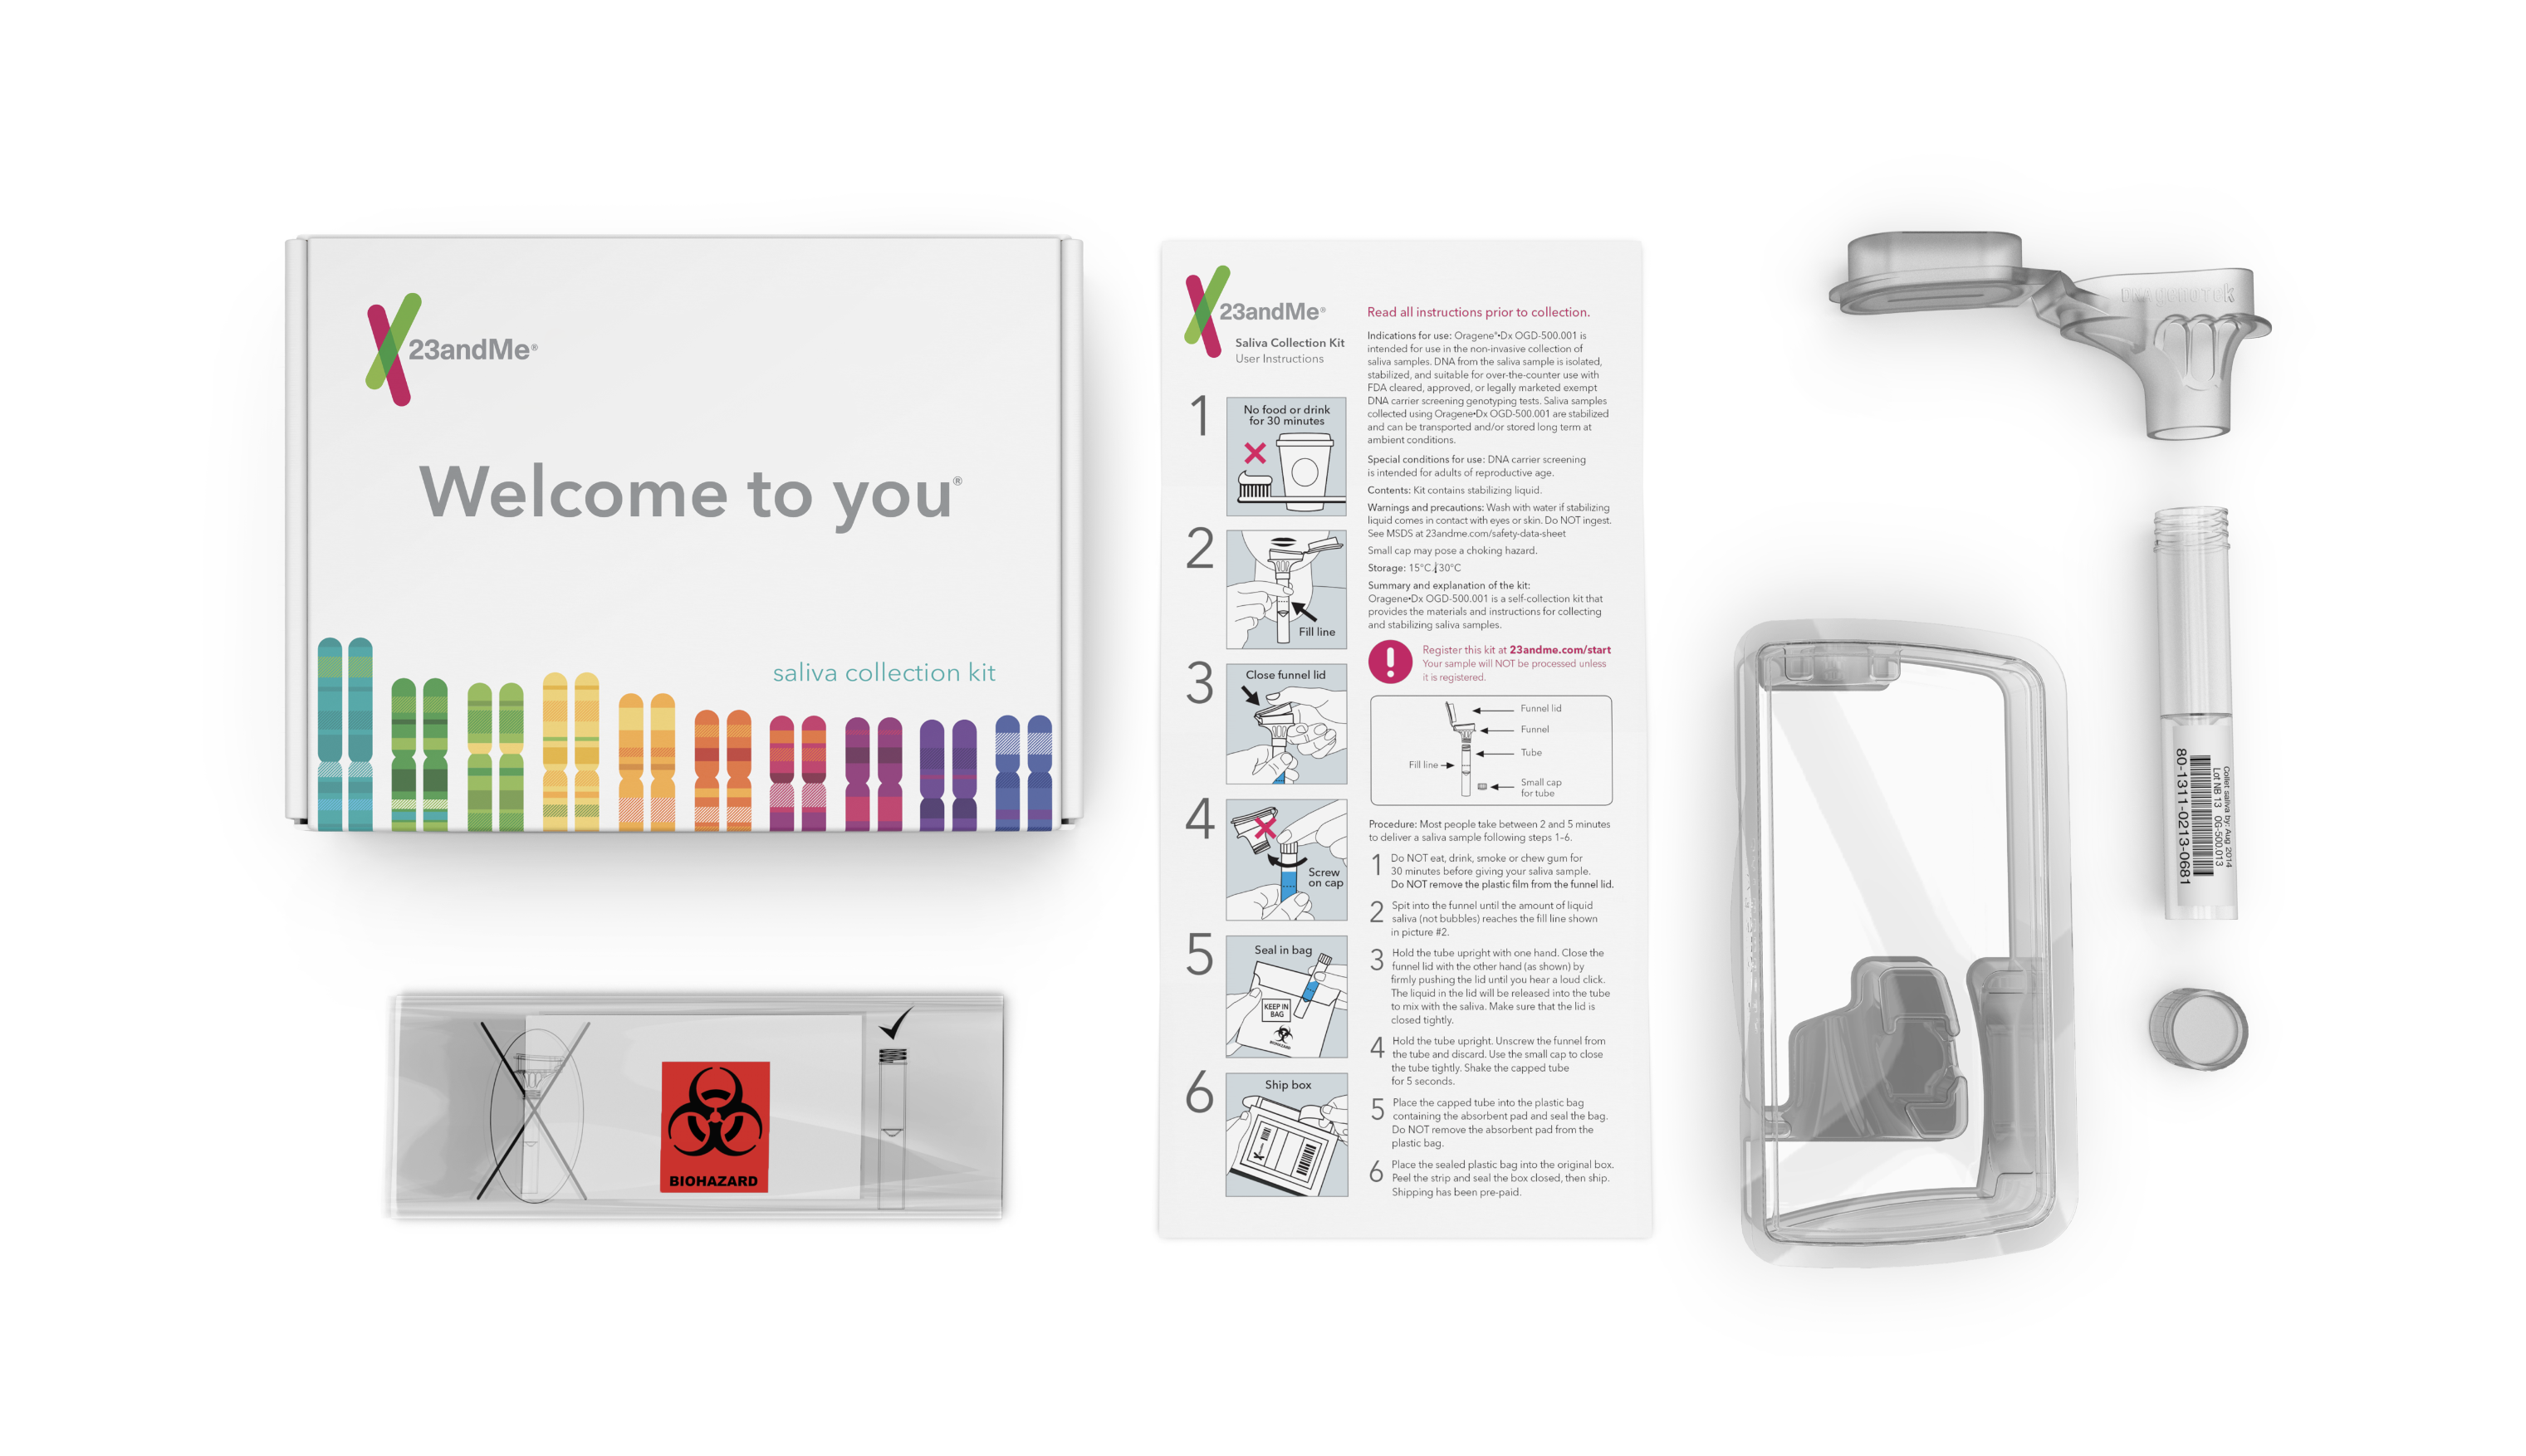 The contents contained in each 23andMe collection kit